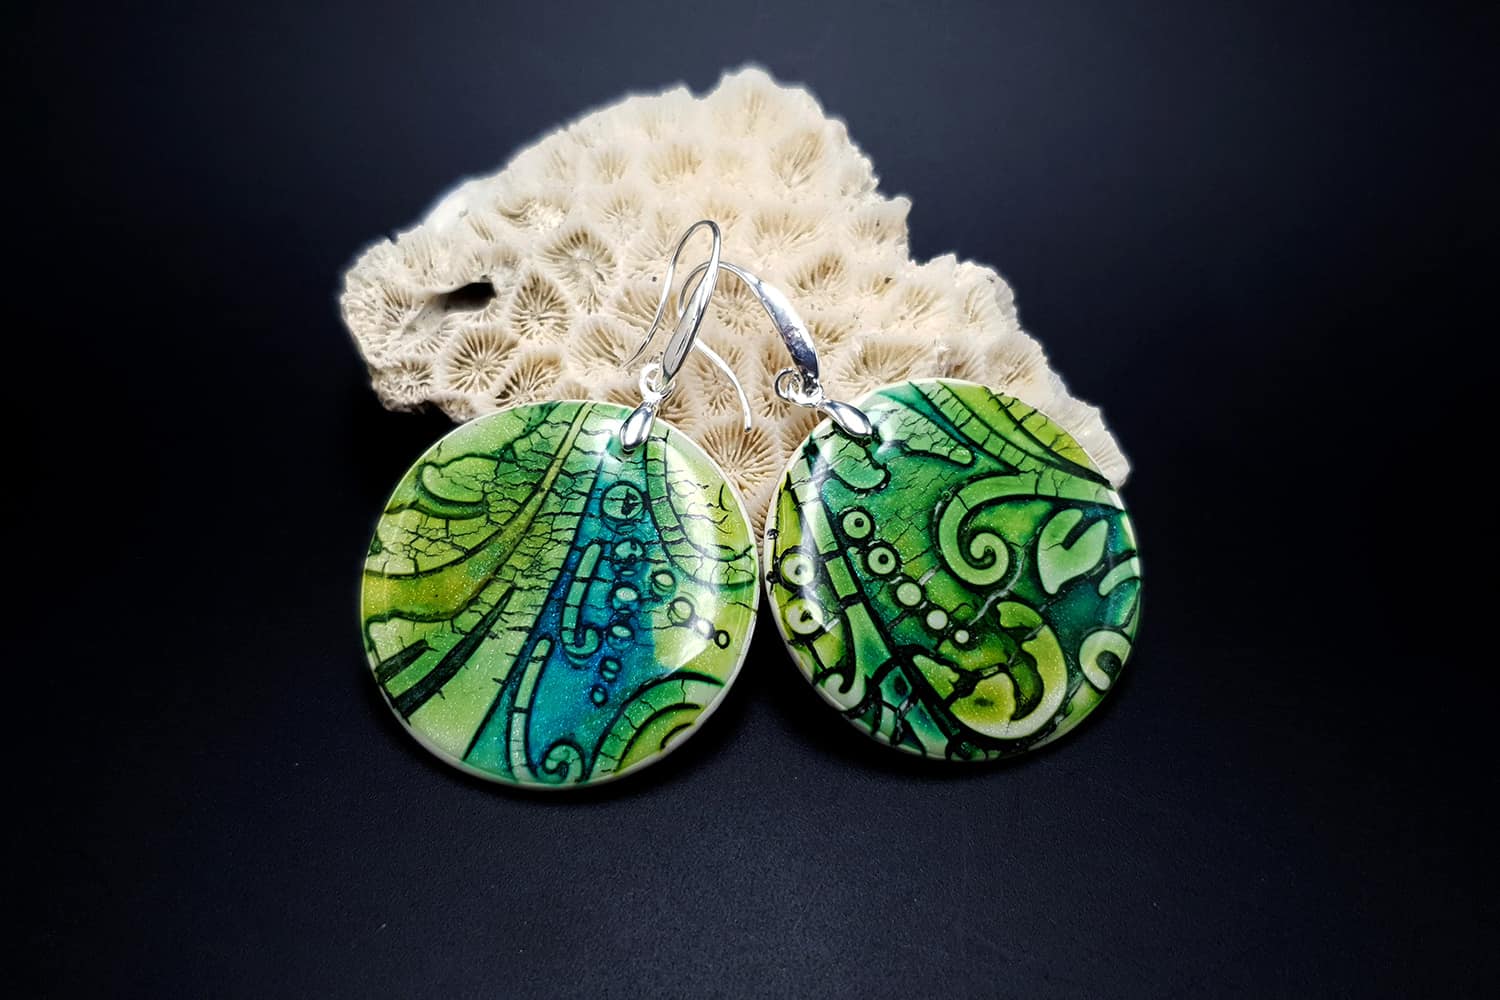 Jewelry from "Faux Glazed Cracked Ceramic" course for your inspiration #7